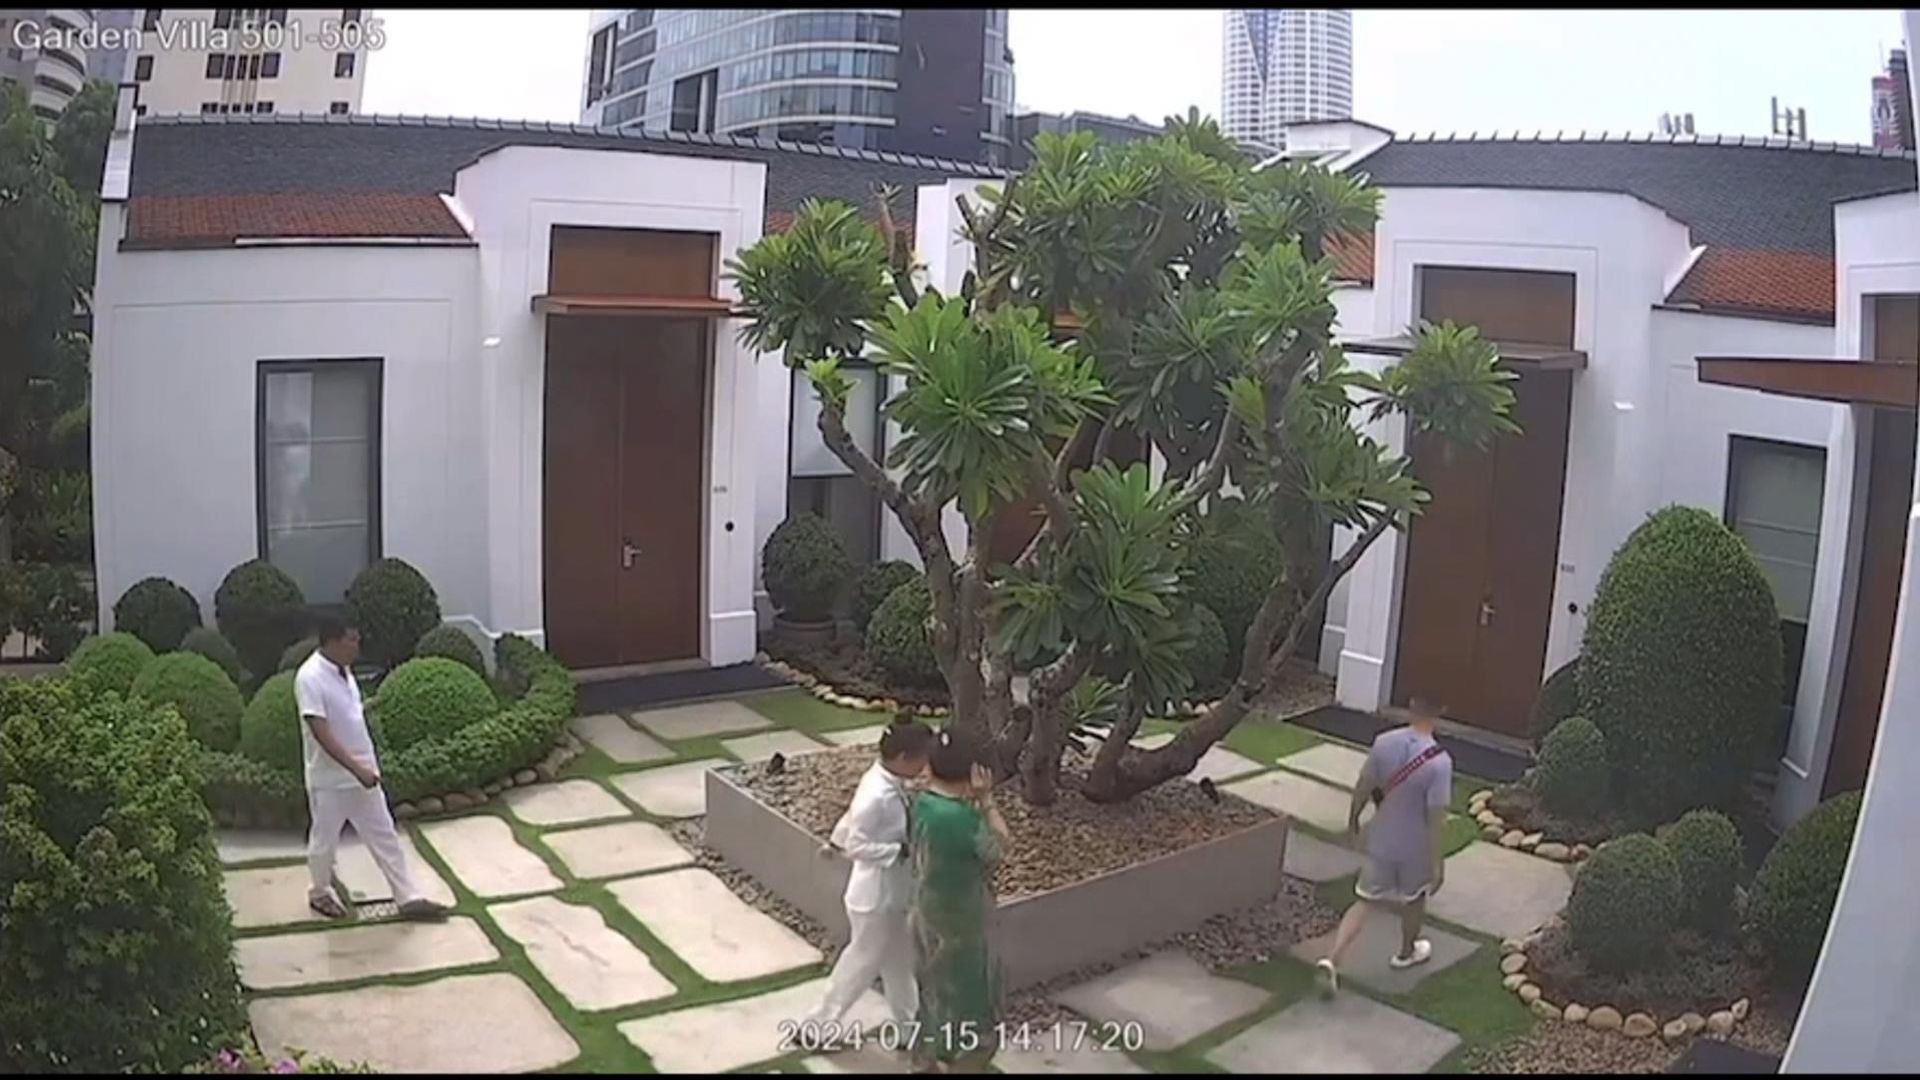 CCTV shows last movements of Bangkok hotel guests before suspected poisoning